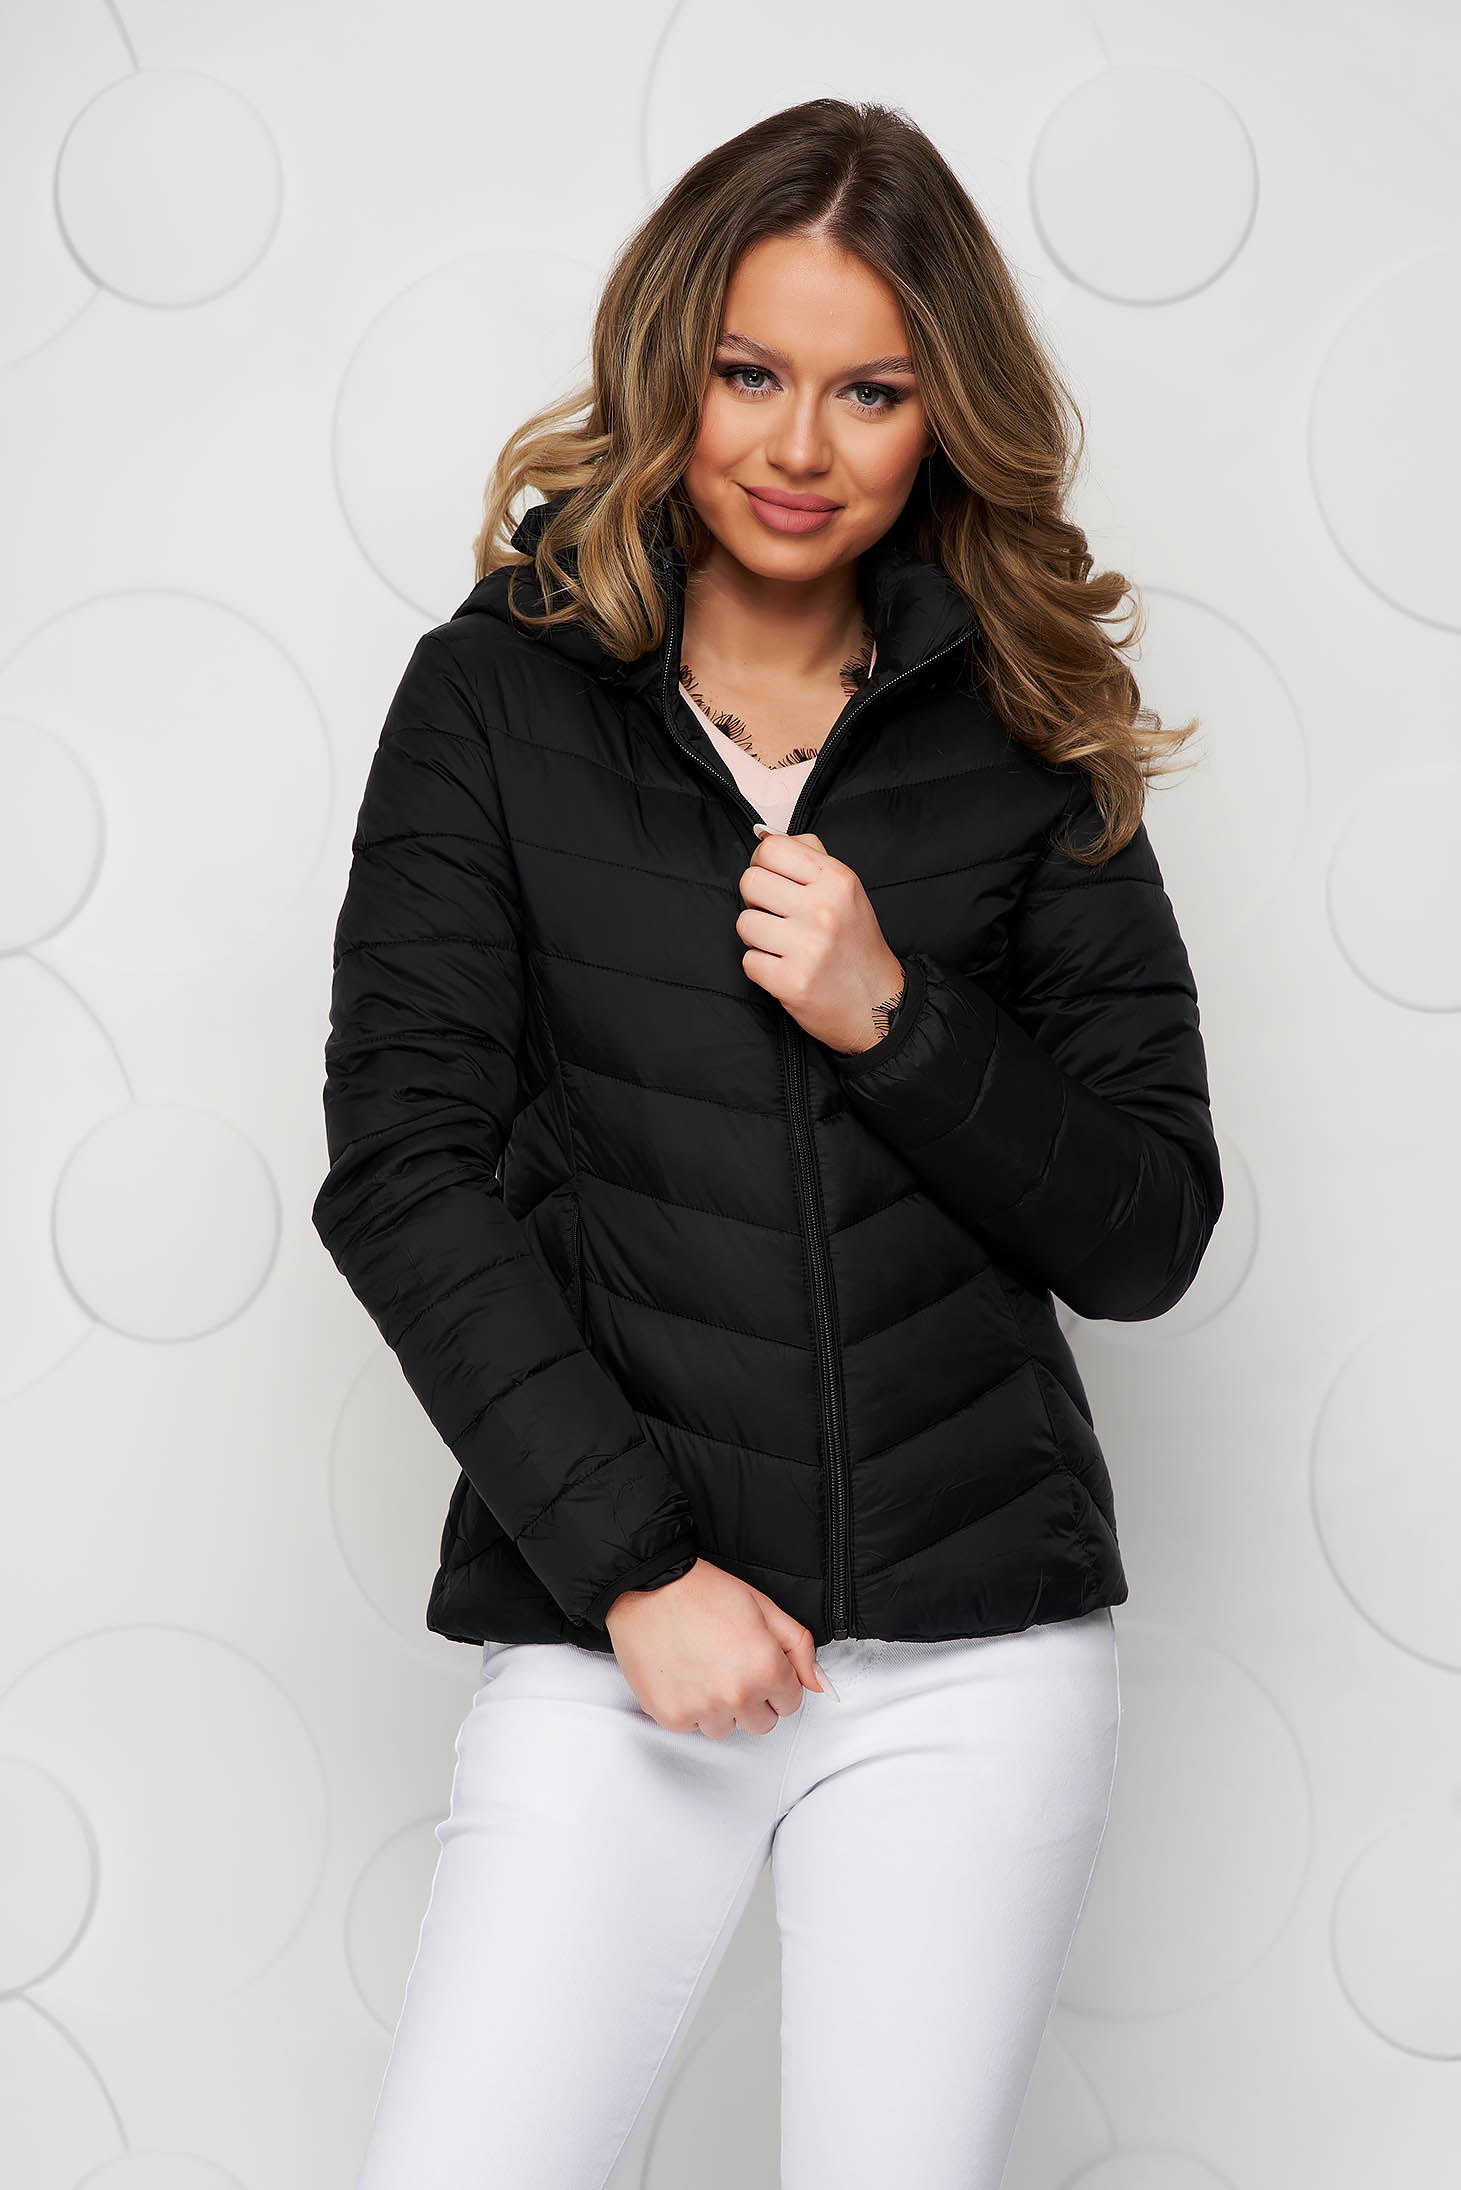 Black jacket tented from slicker with zipper details pockets 1 - StarShinerS.com